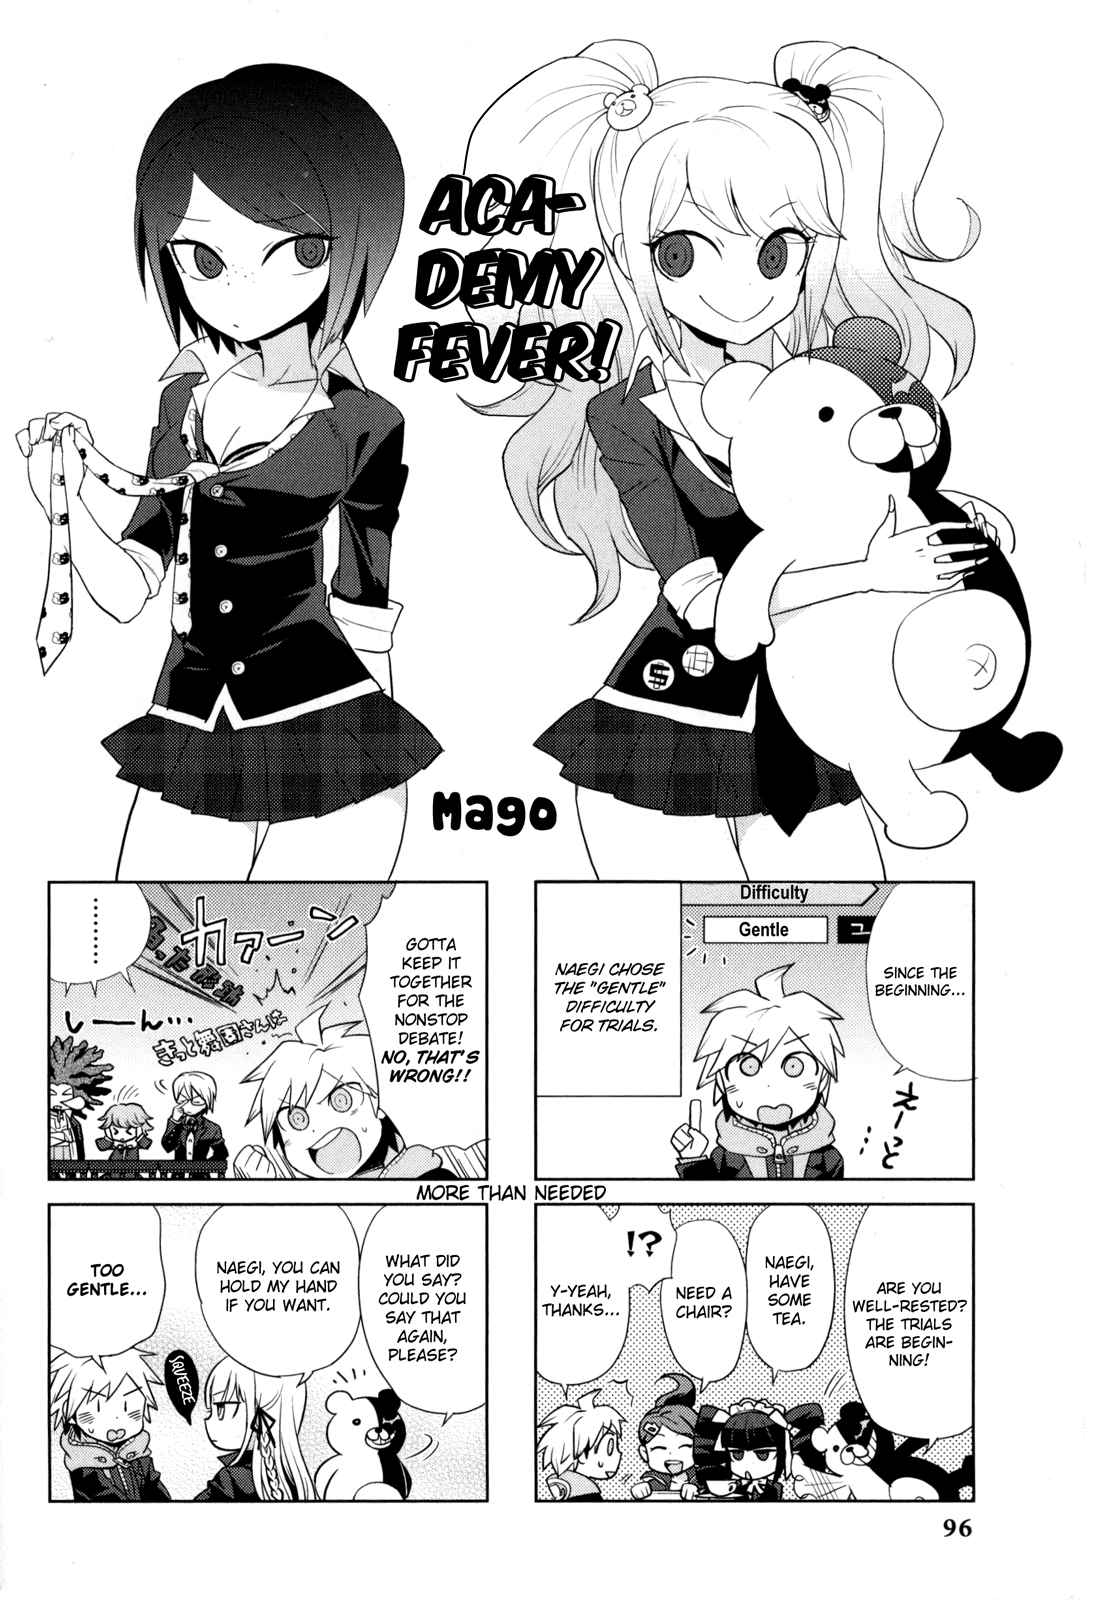 Danganronpa The Academy of Hope and the High School Students of Despair 4 koma Kings Vol. 2 Ch. 16 Academy Fever! by Mago